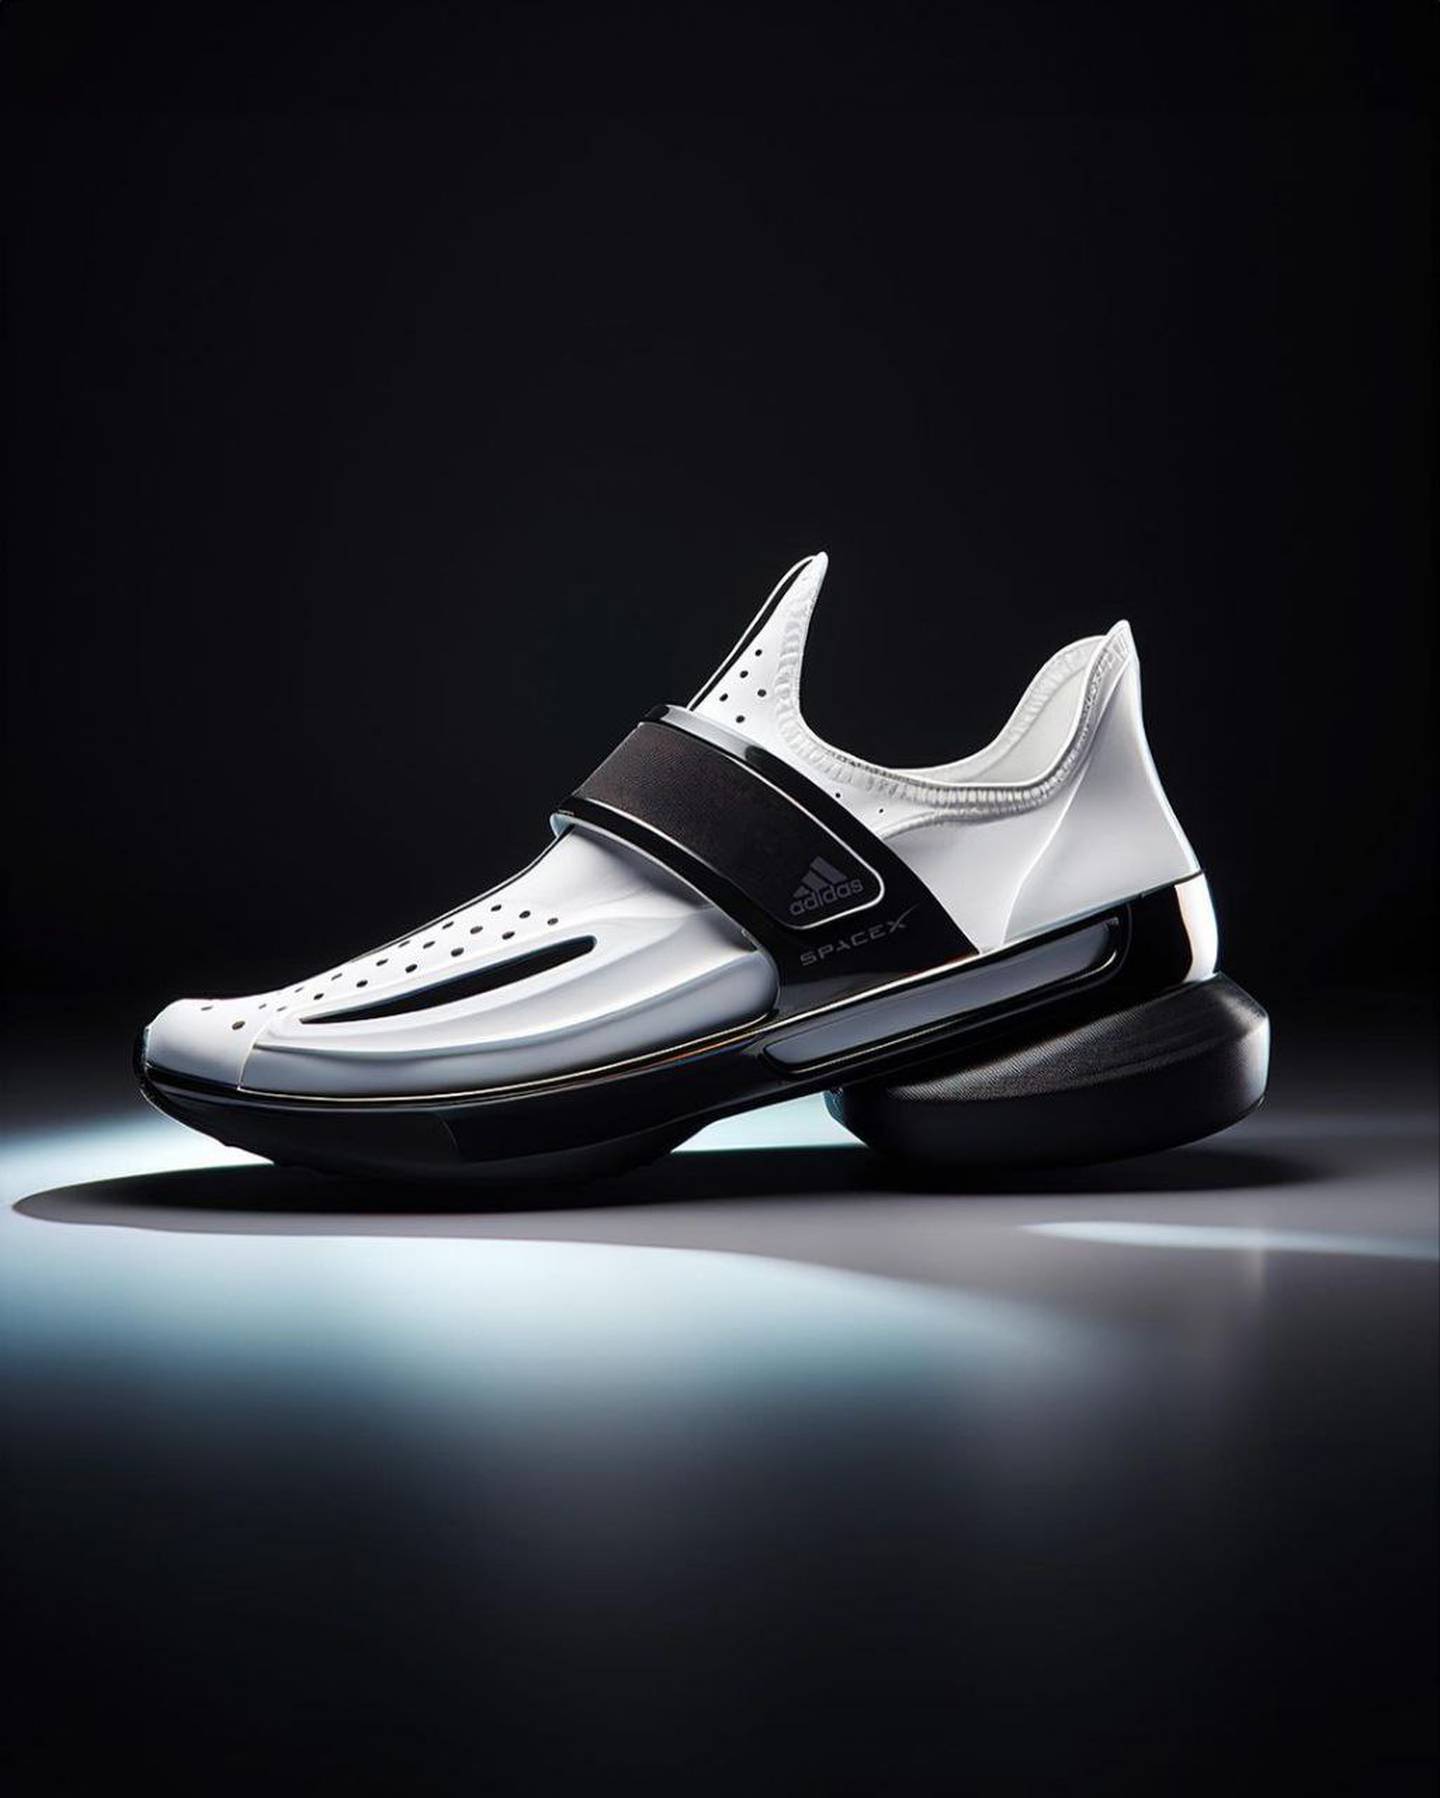 Adidas x SpaceX Sneakers